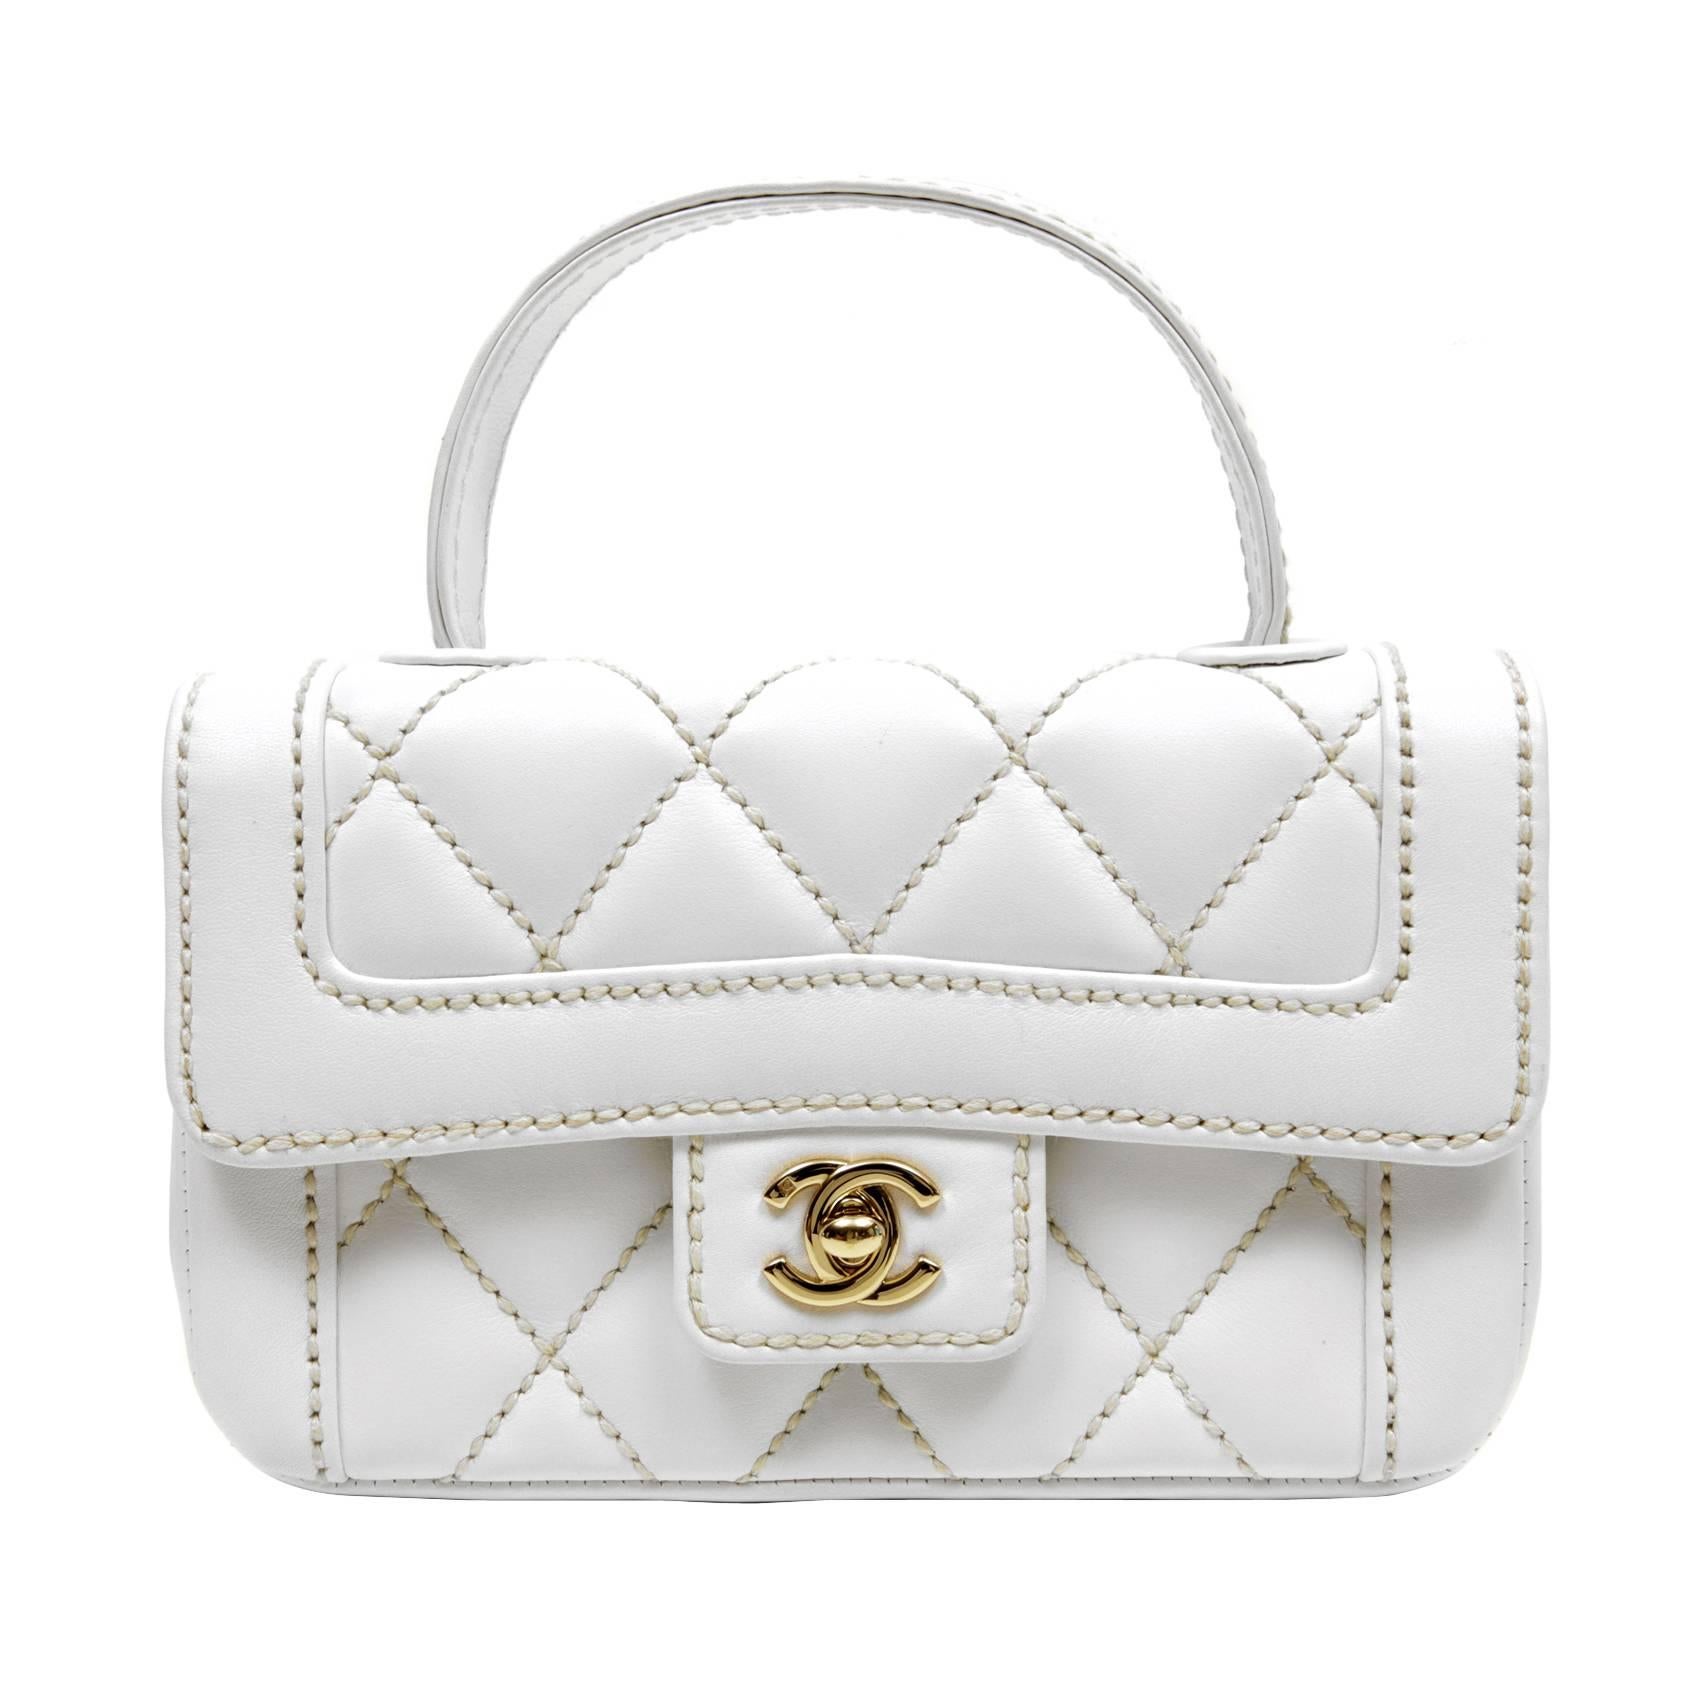 Chanel White Leather Mini Kelly Classic with GHW 